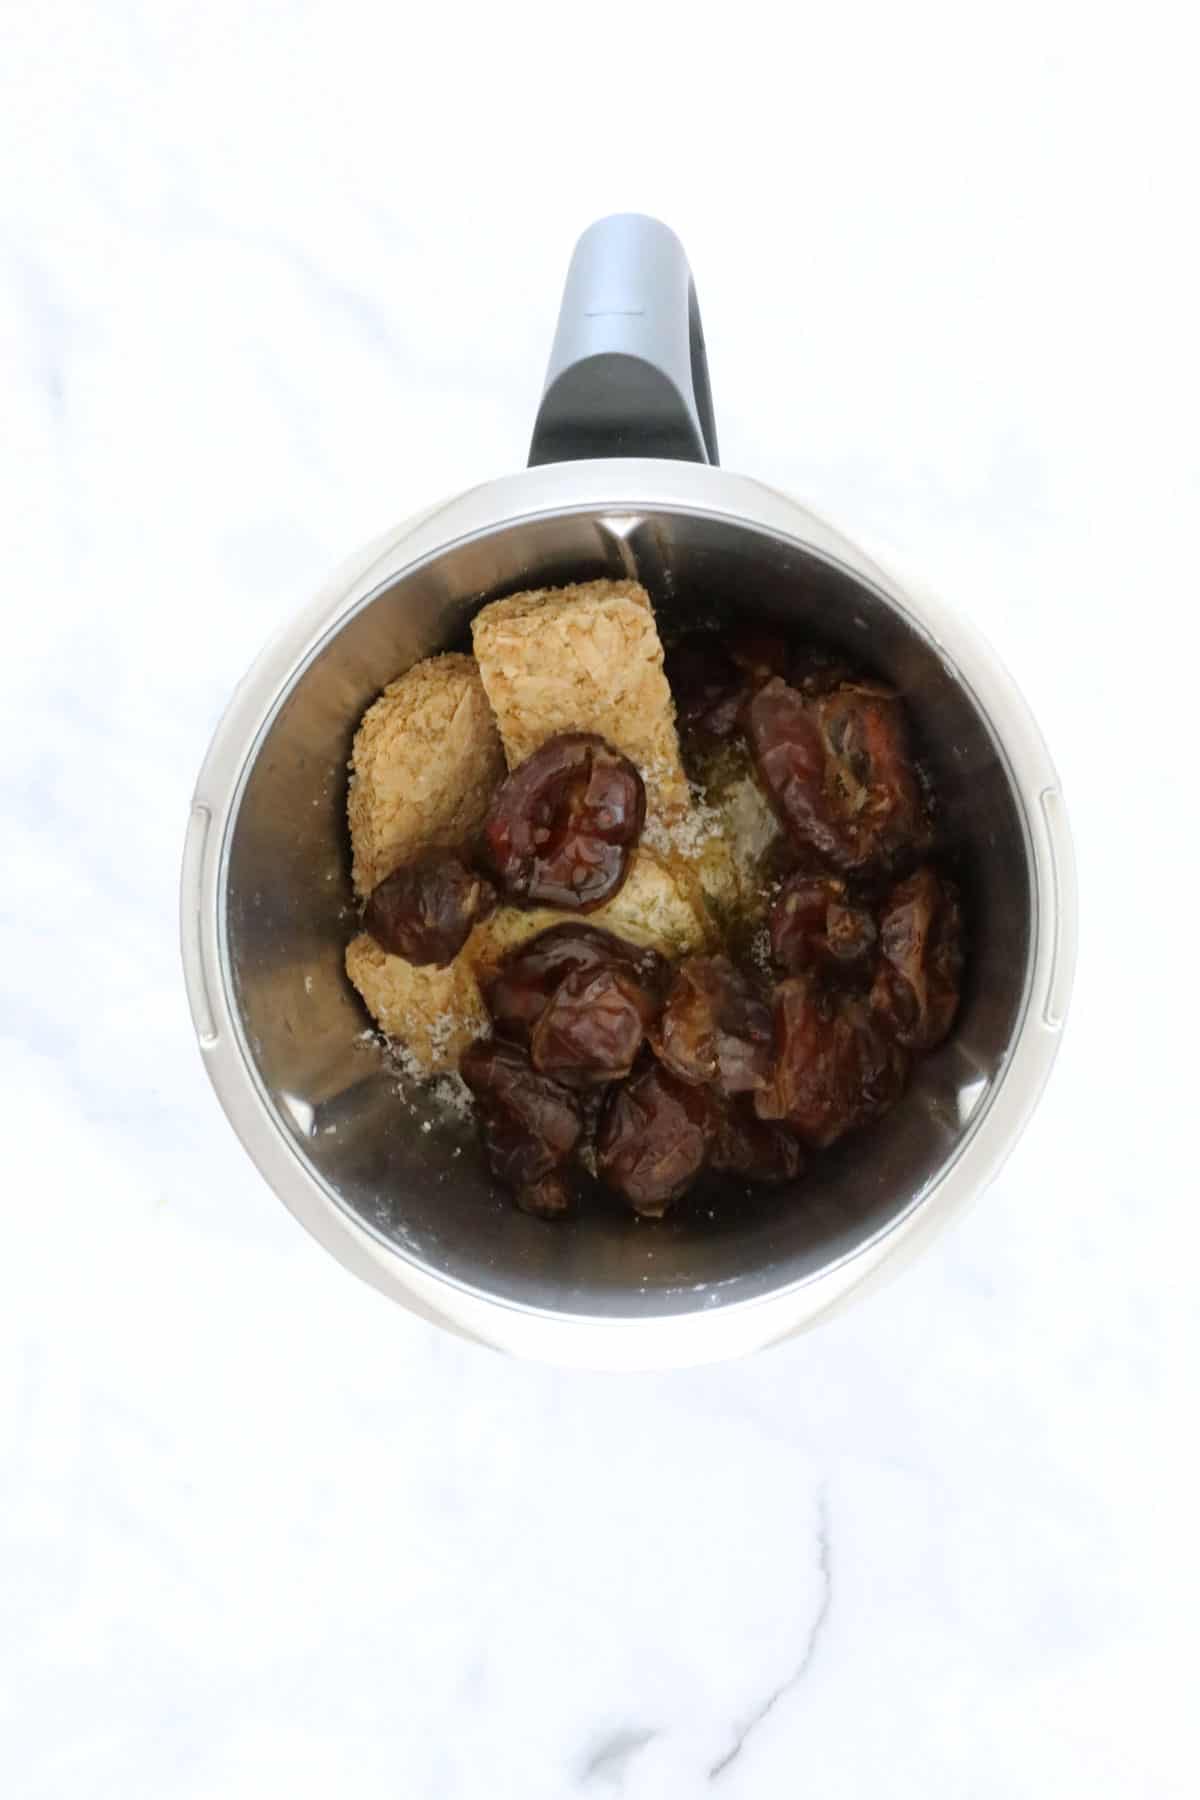 Weet-Bix, dates, sultanas, honey and coconut placed in a bowl.